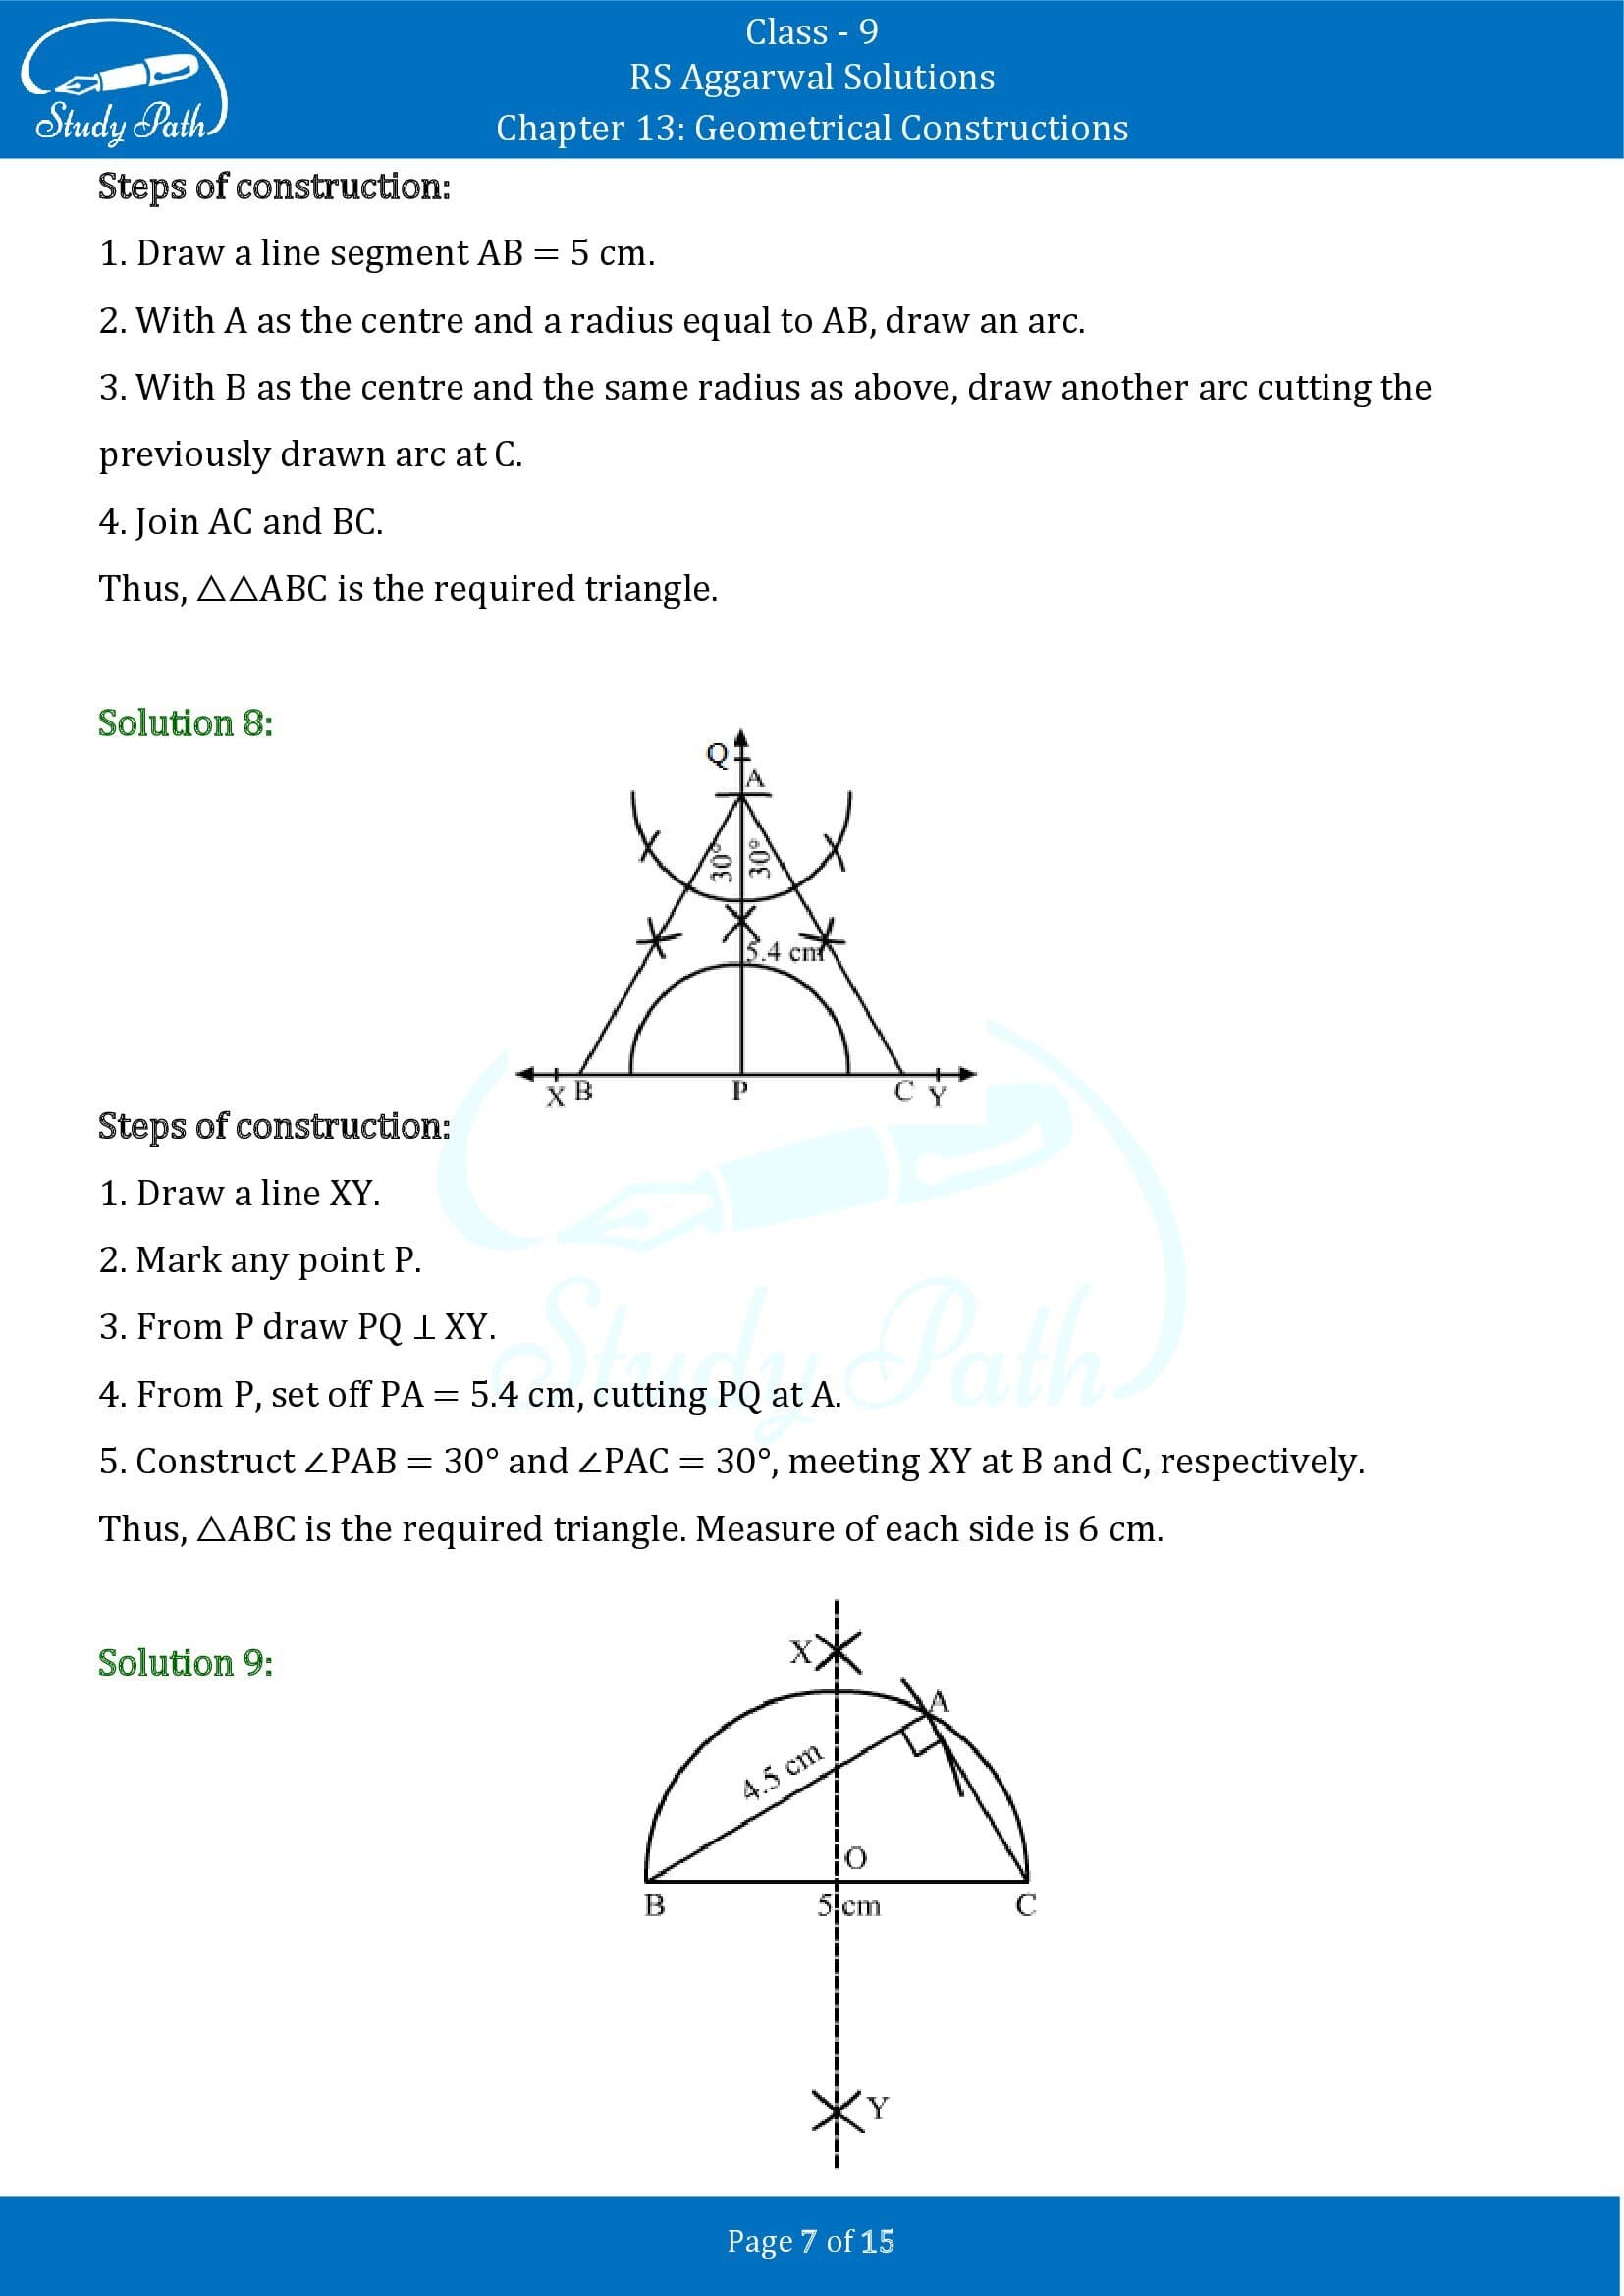 RS Aggarwal Solutions Class 9 Chapter 13 Geometrical Constructions 07